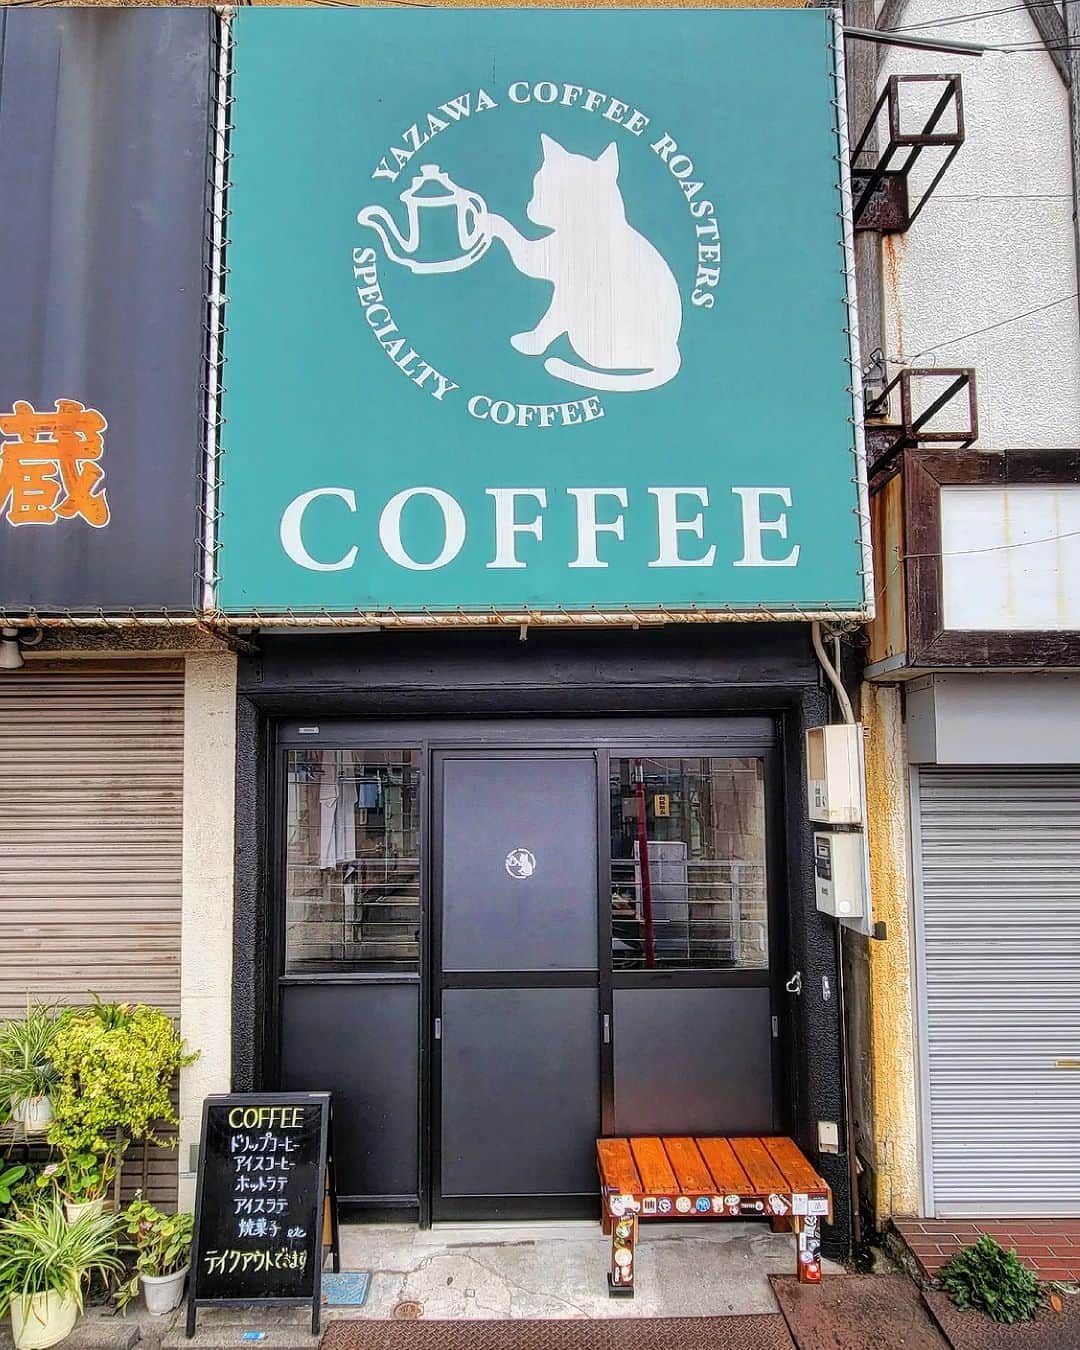 CAFE-STAGRAMMERのインスタグラム：「What do you say to taking a cup of coffee? もうすぐ終わる、せぷてんばー♪  #京成立石 #☕ #京成立石カフェ #keiseitateishi #yazawacoffeeroasters #ヤザワコーヒーロースターズ #cafetyo #tokyocafe #カフェ #cafe #tokyo #咖啡店 #咖啡廳 #咖啡 #카페 #คาเฟ่ #Kafe #coffeeaddict #カフェ部 #cafehopping #coffeelover #discovertokyo #visittokyo #instacoffee #instacafe #東京カフェ部 #sharingaworldofshops」